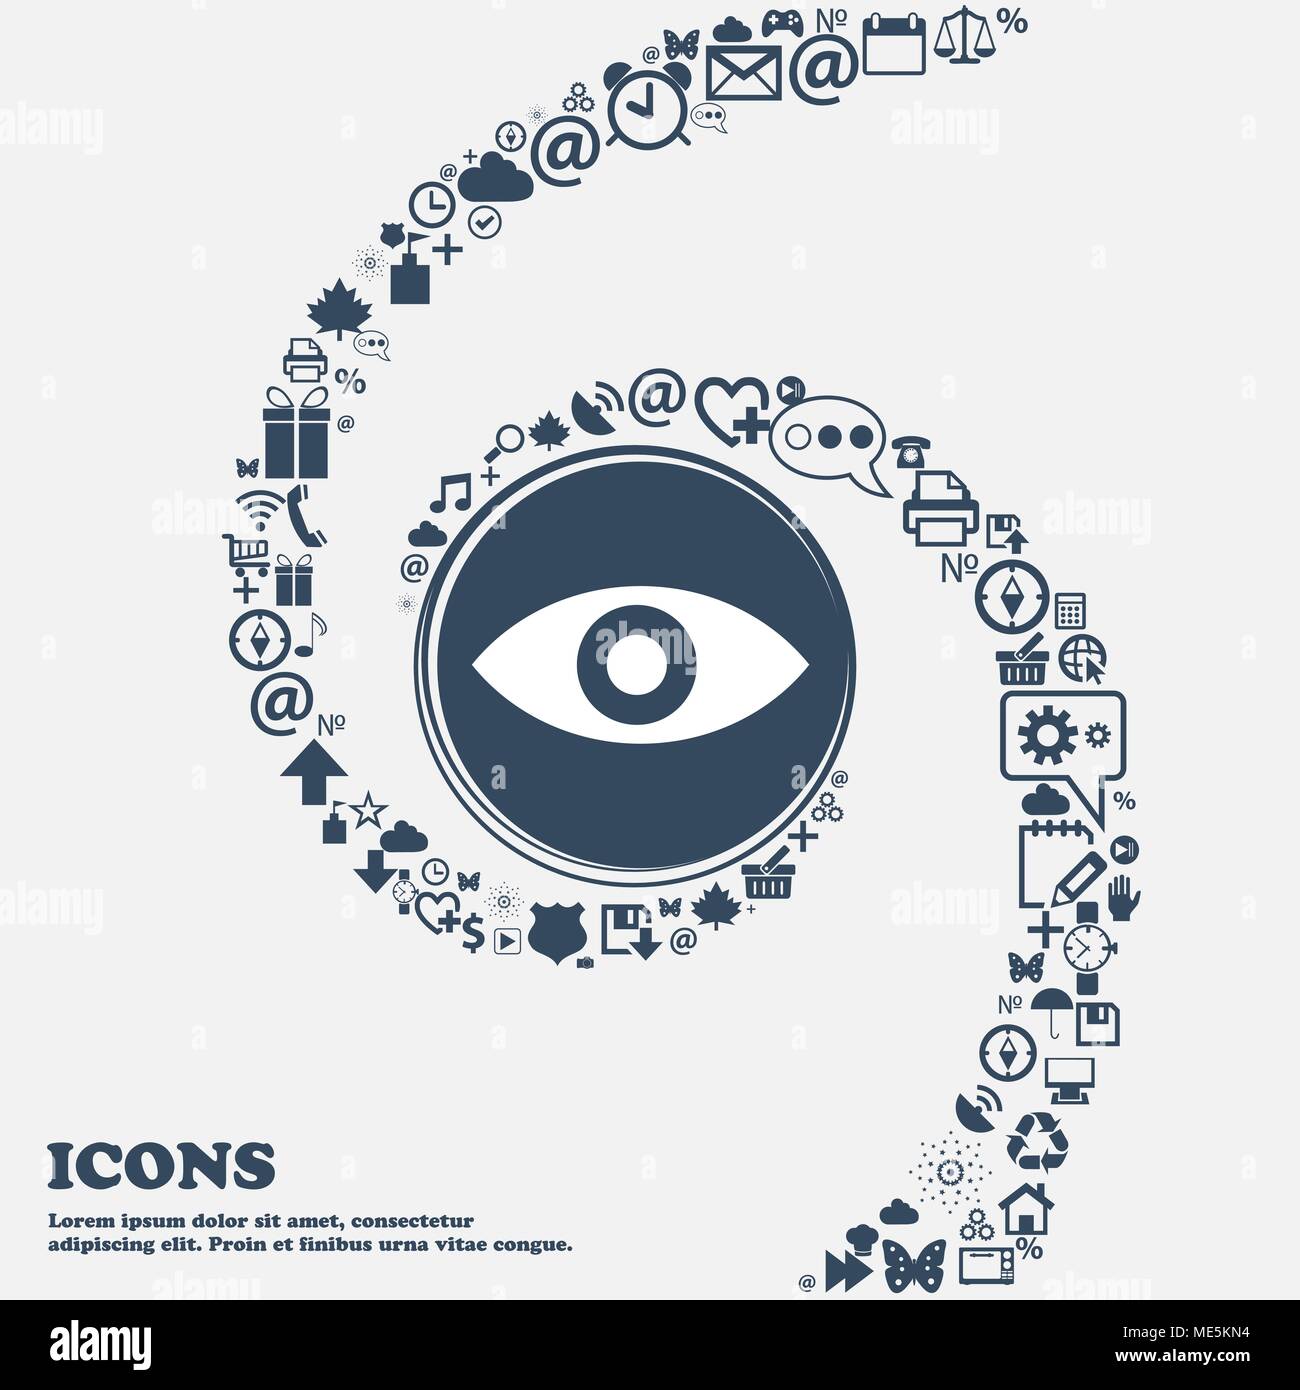 https://c8.alamy.com/comp/ME5KN4/eye-publish-content-sixth-sense-intuition-icon-sign-in-the-center-around-the-many-beautiful-symbols-twisted-in-a-spiral-you-can-use-each-separate-ME5KN4.jpg